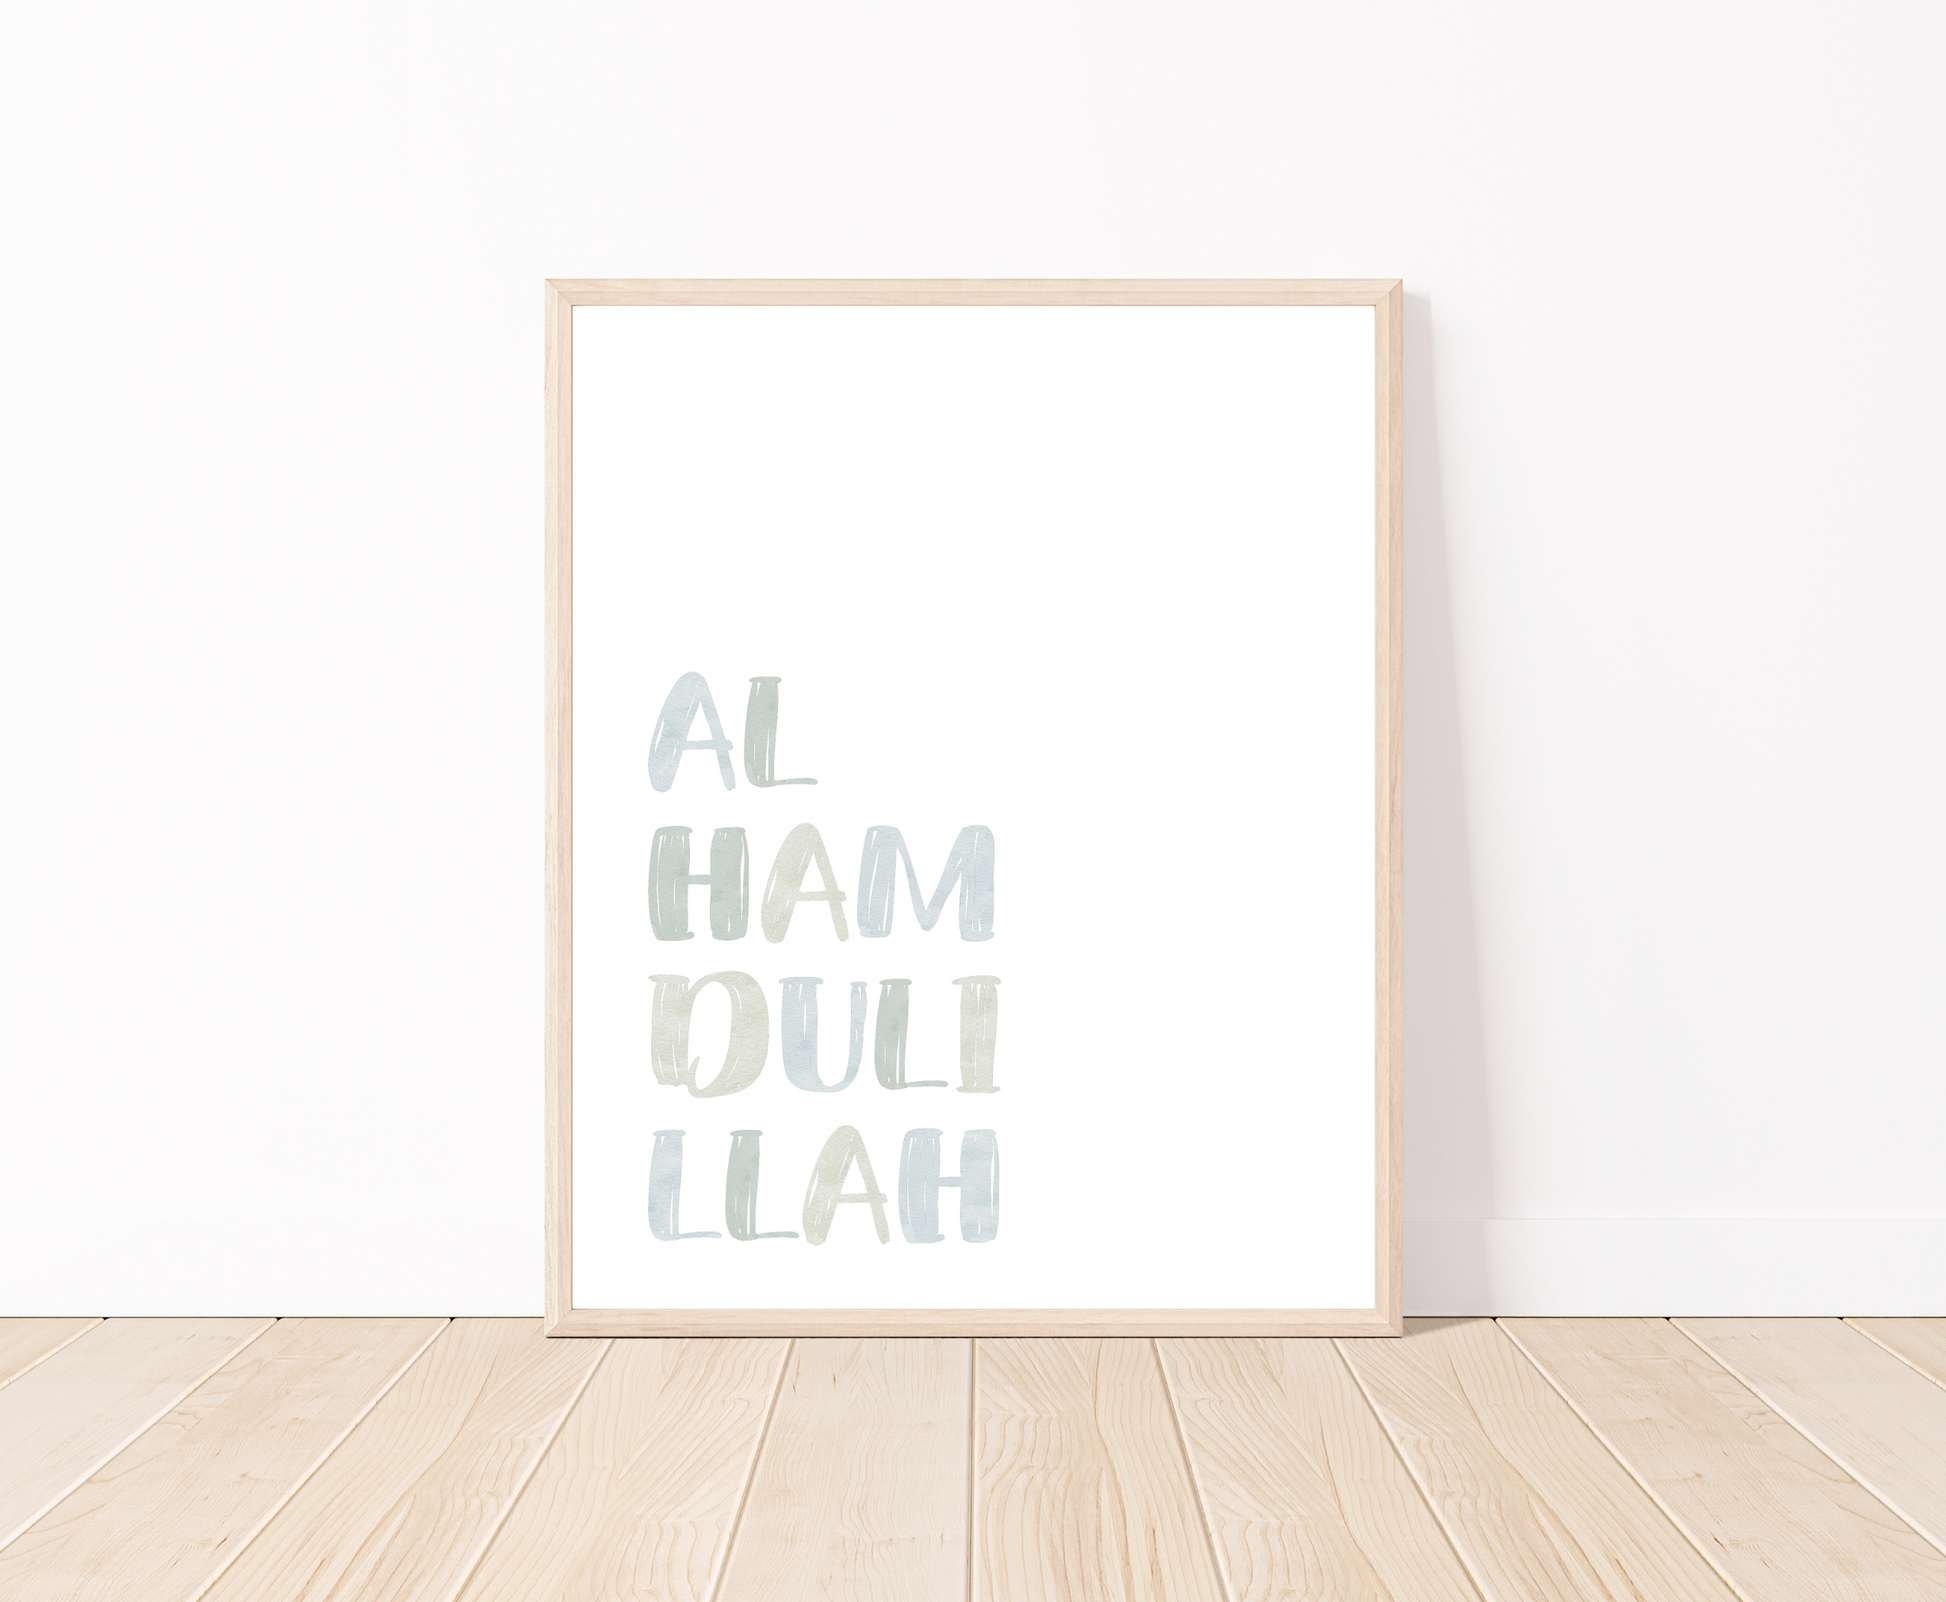 A little boy’s room digital print is placed on a white wall and parquet flooring. It includes “Alhamdulillah” written in upper case and multi-colored letters with a white background.